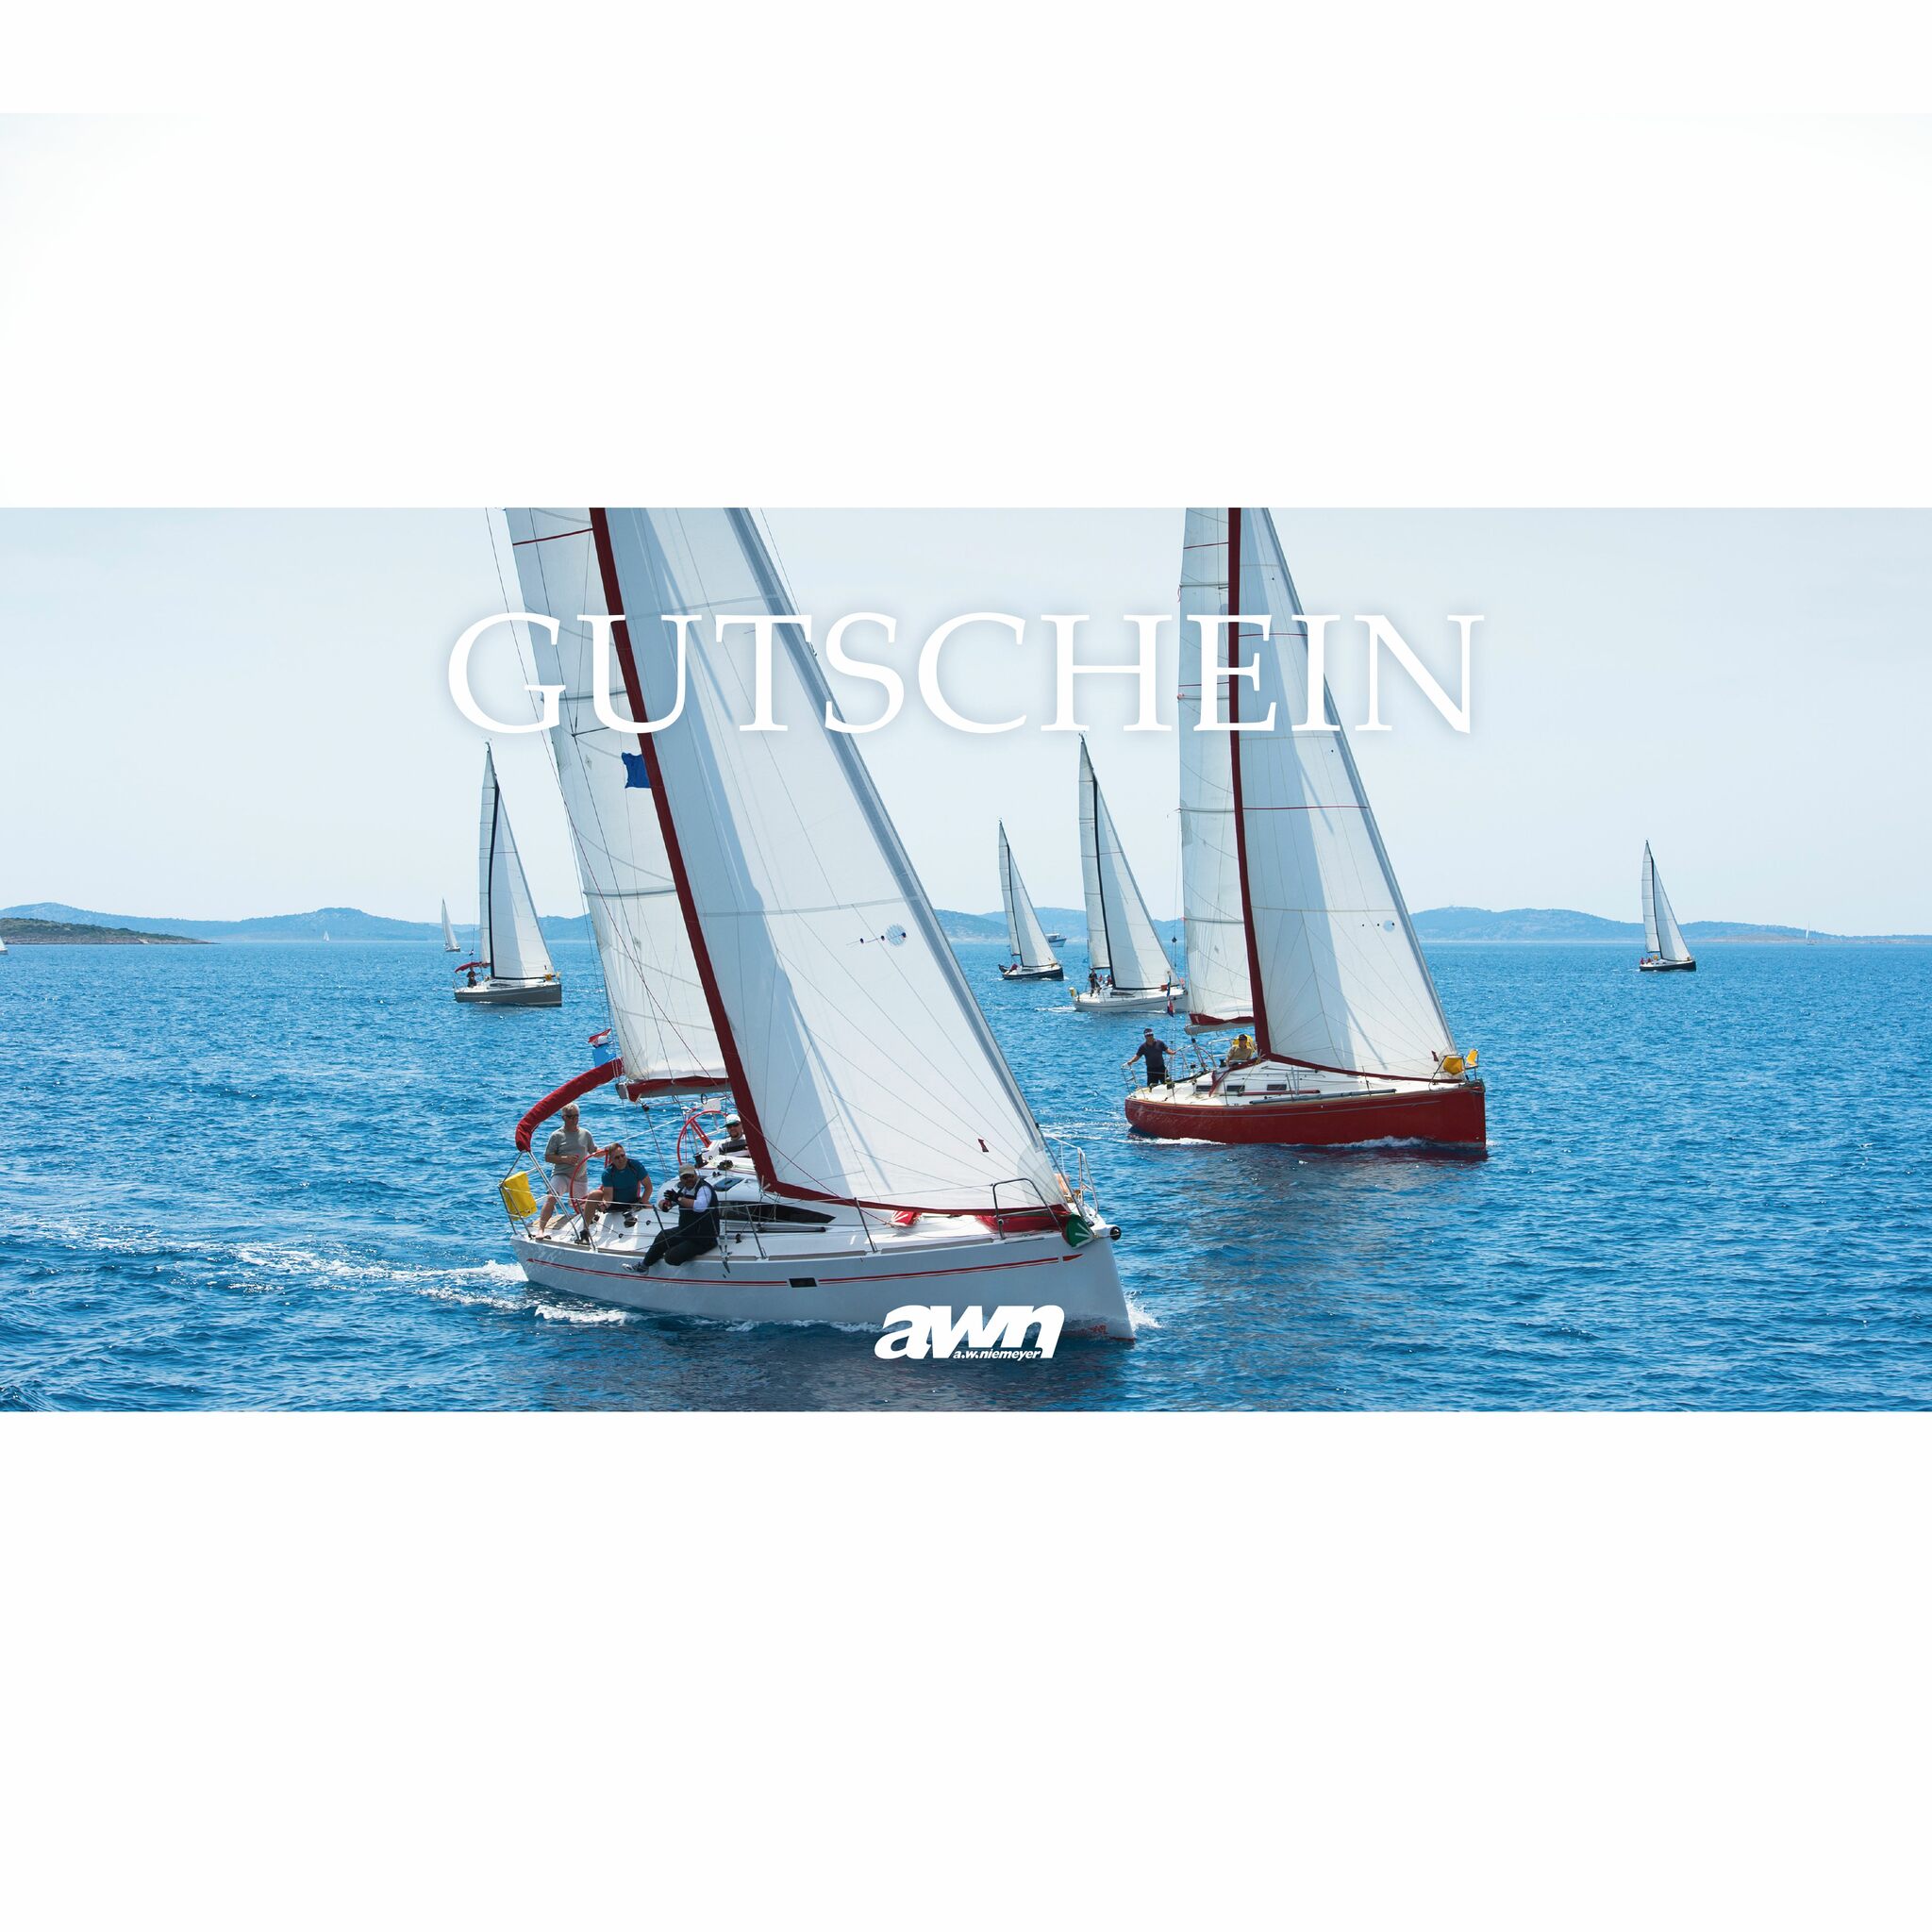 Voucher directly to print - Sailing